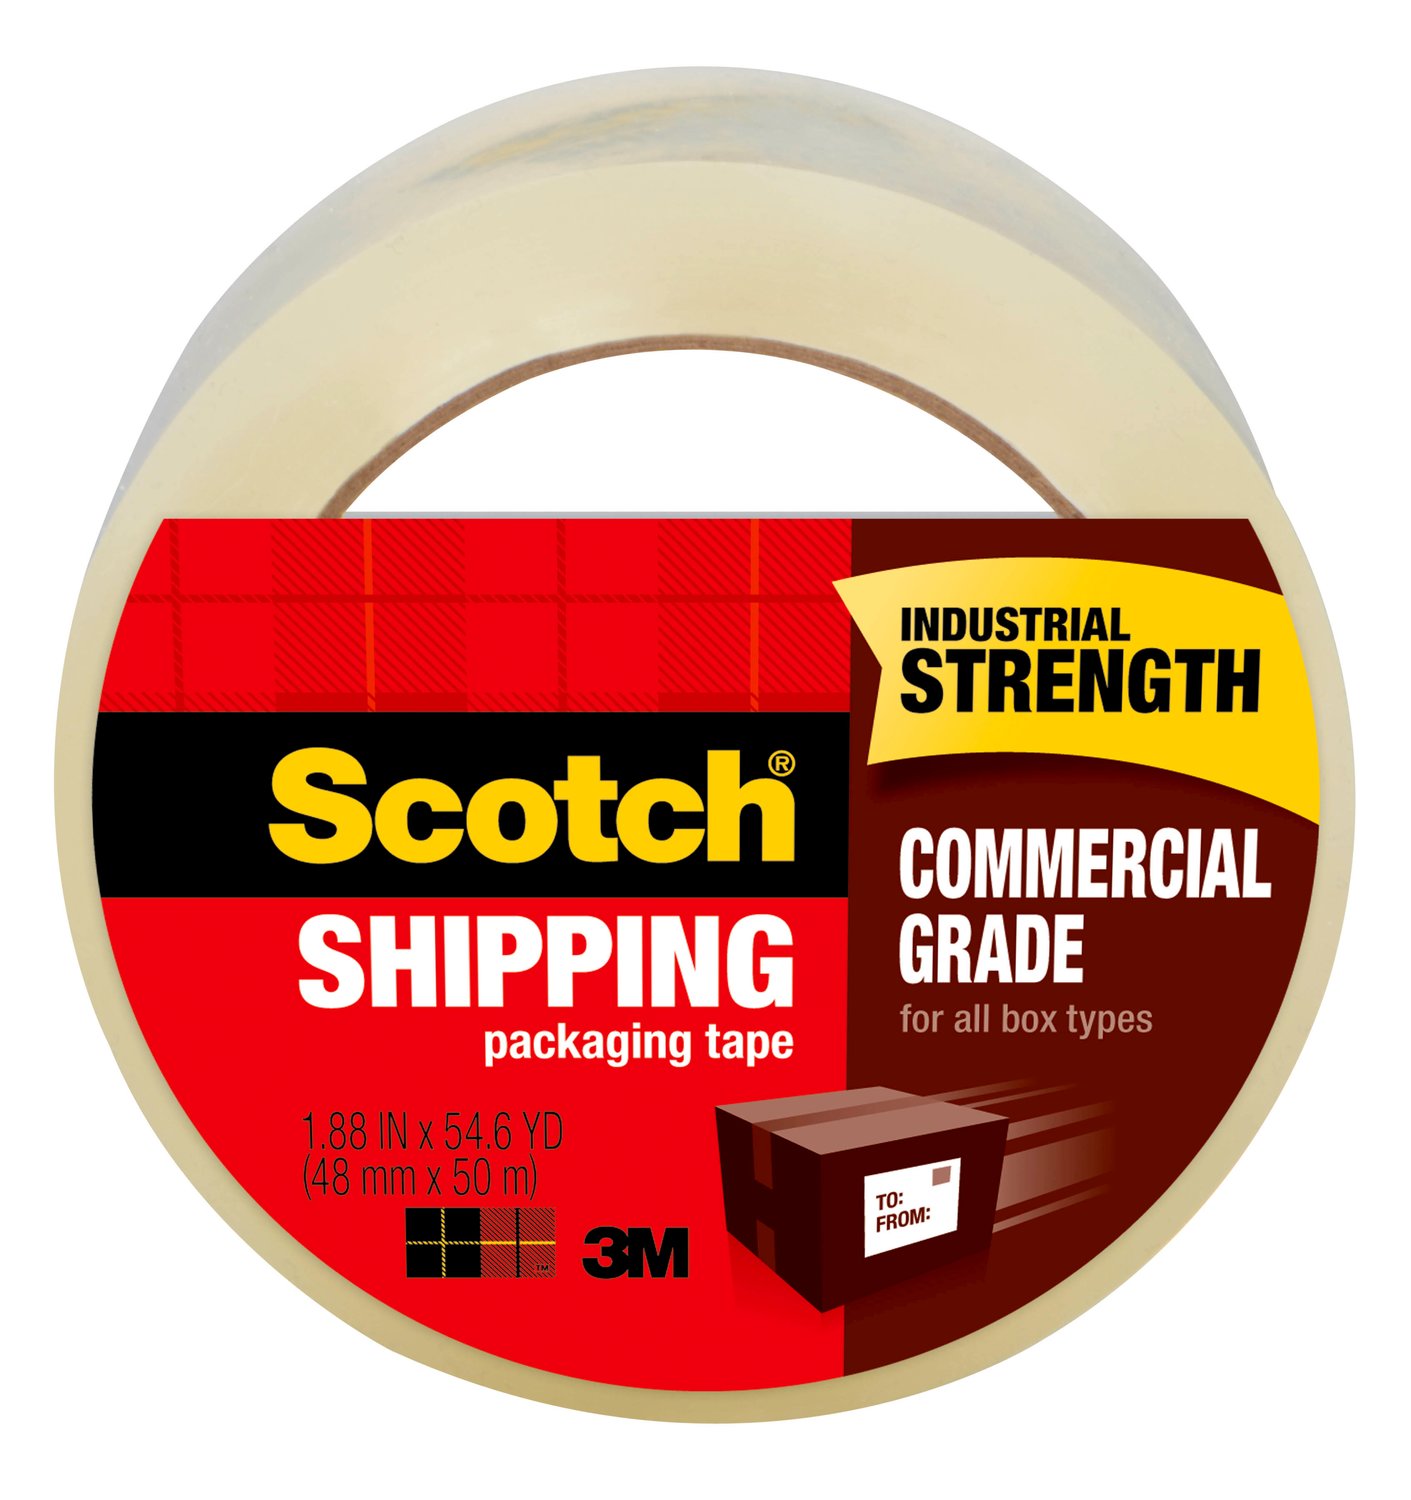 7010332952 - Scotch Commercial Grade Shipping Packaging Tape 3750, 1.88 in x 54.6 yd
(48 mm x 50 m)